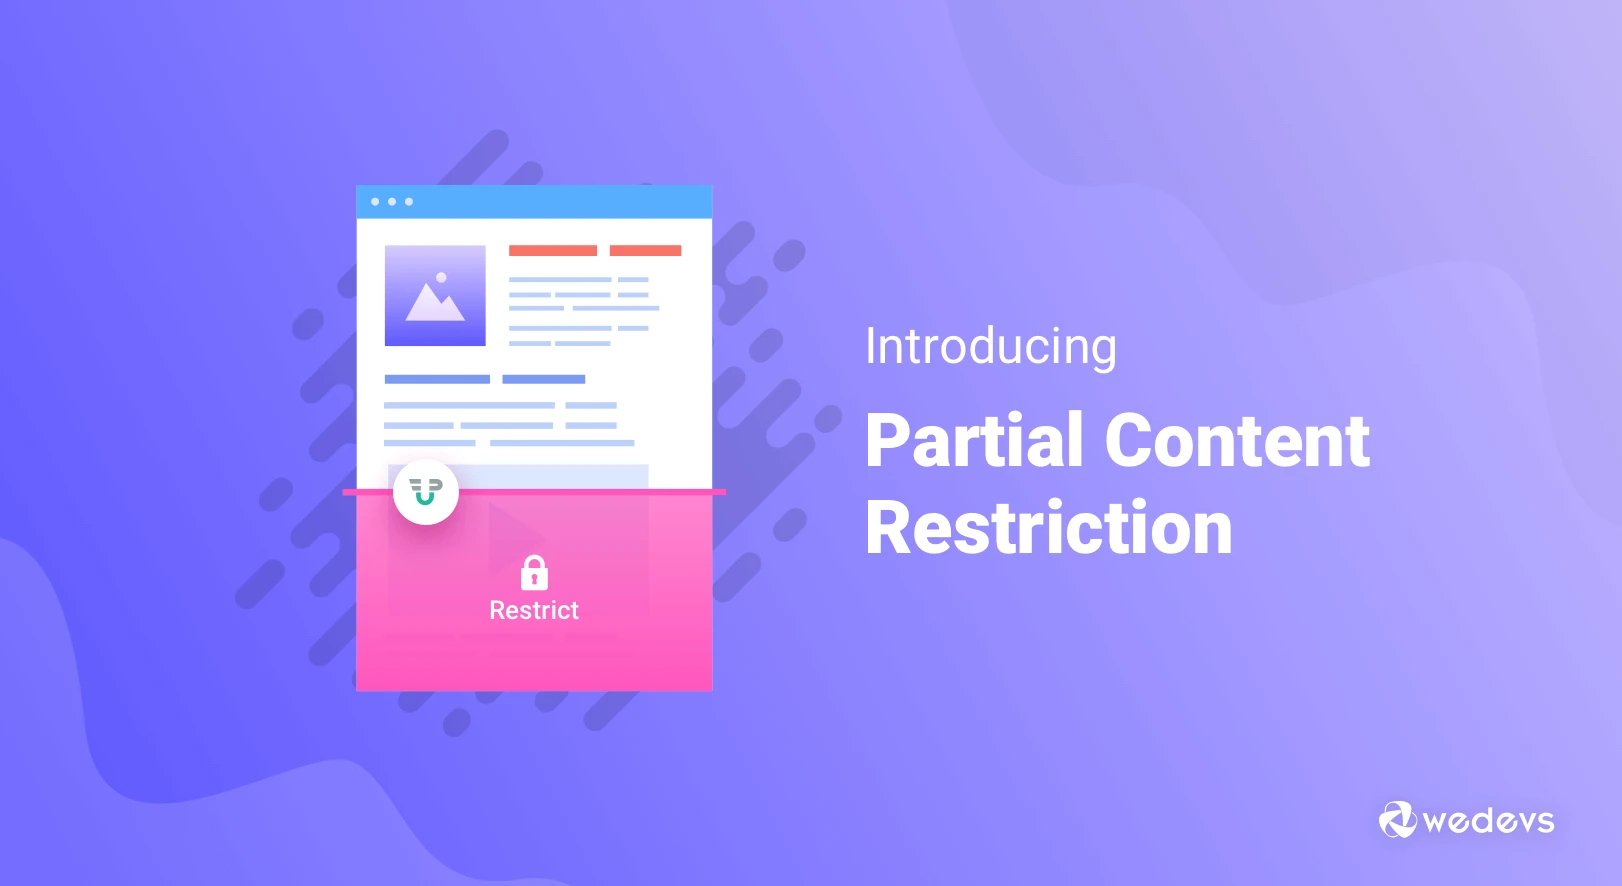 How to Set up Partial Content Restriction in WordPress